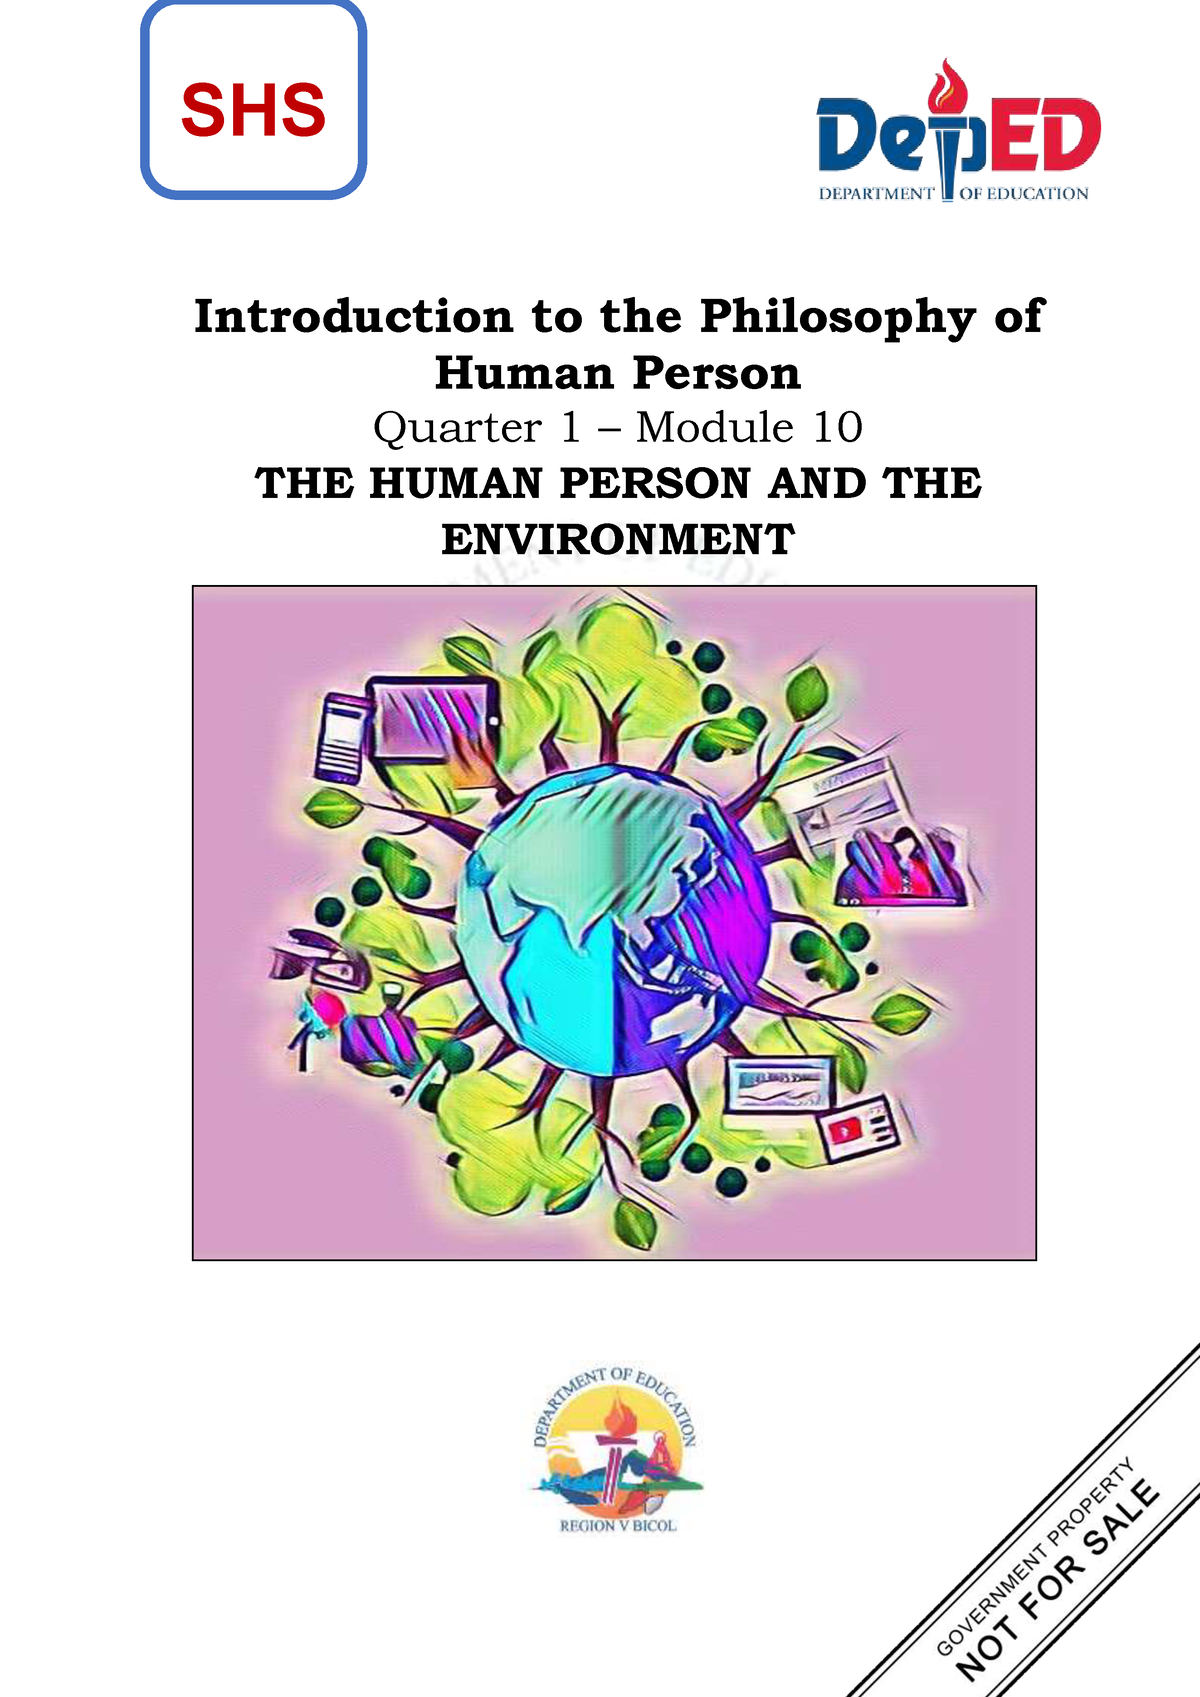 Philo Q1 M10 Answers On Quiz 1 3 Introduction To The Philosophy Of Human Person Quarter 1 4407